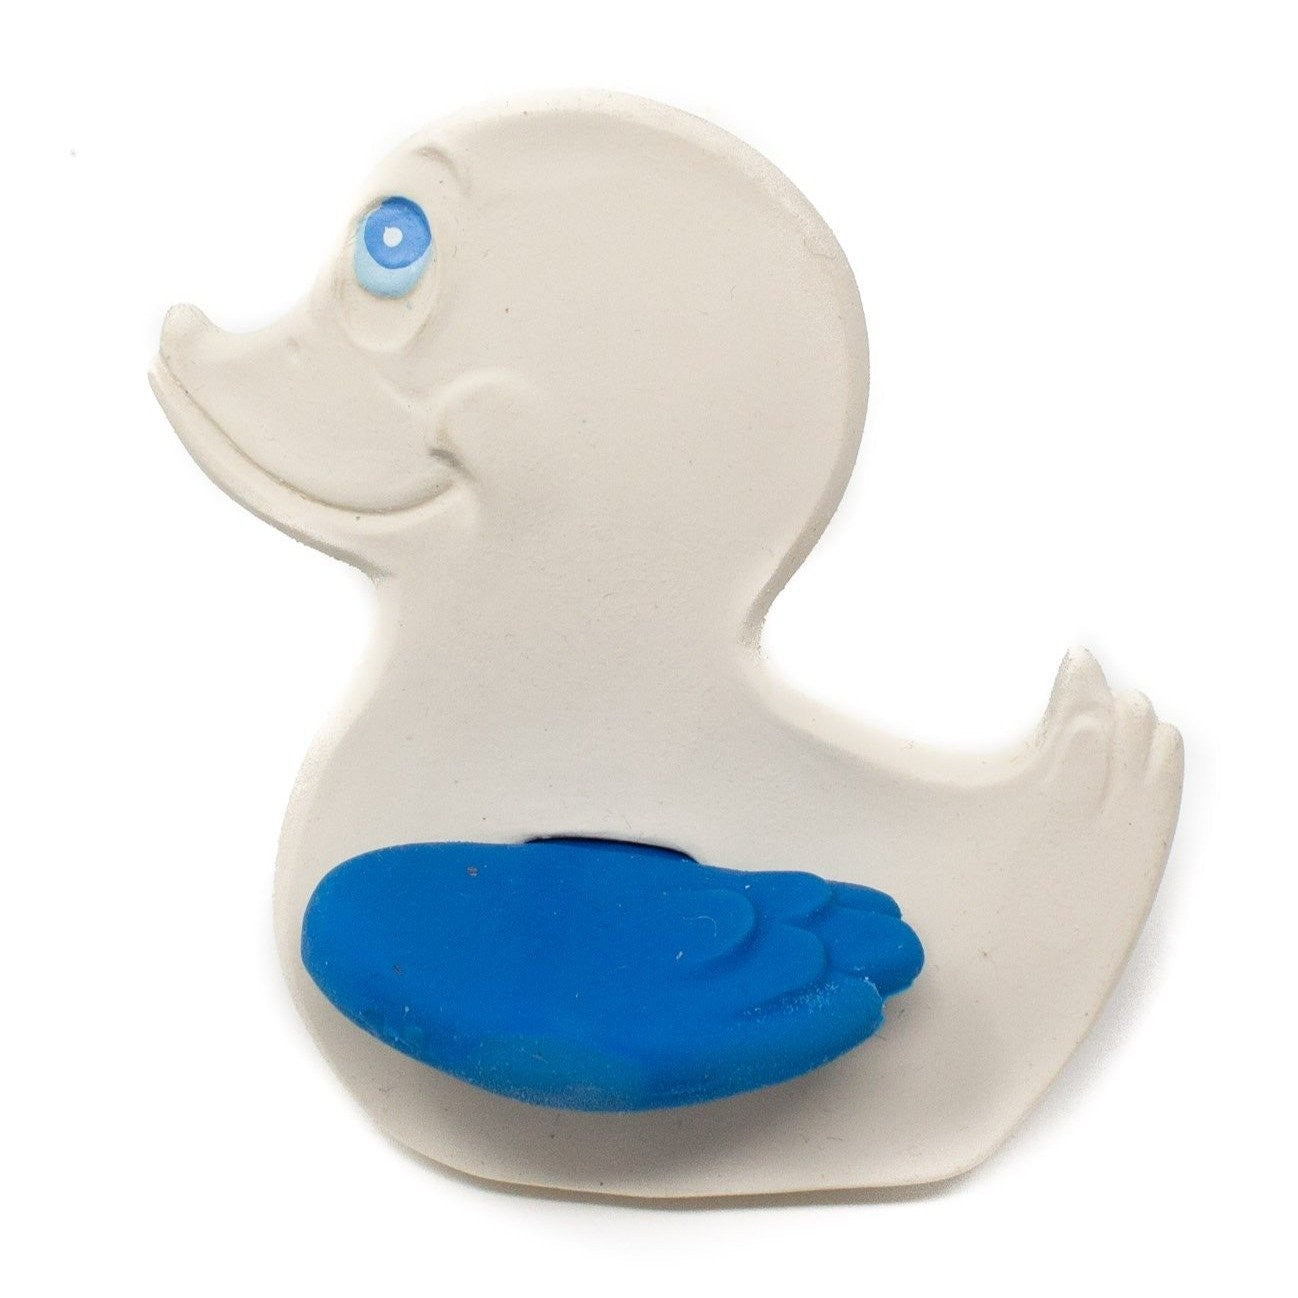 Lanco Duck the Teether with Blue Wings - Natural Latex Rubber Toy for Teething Babies